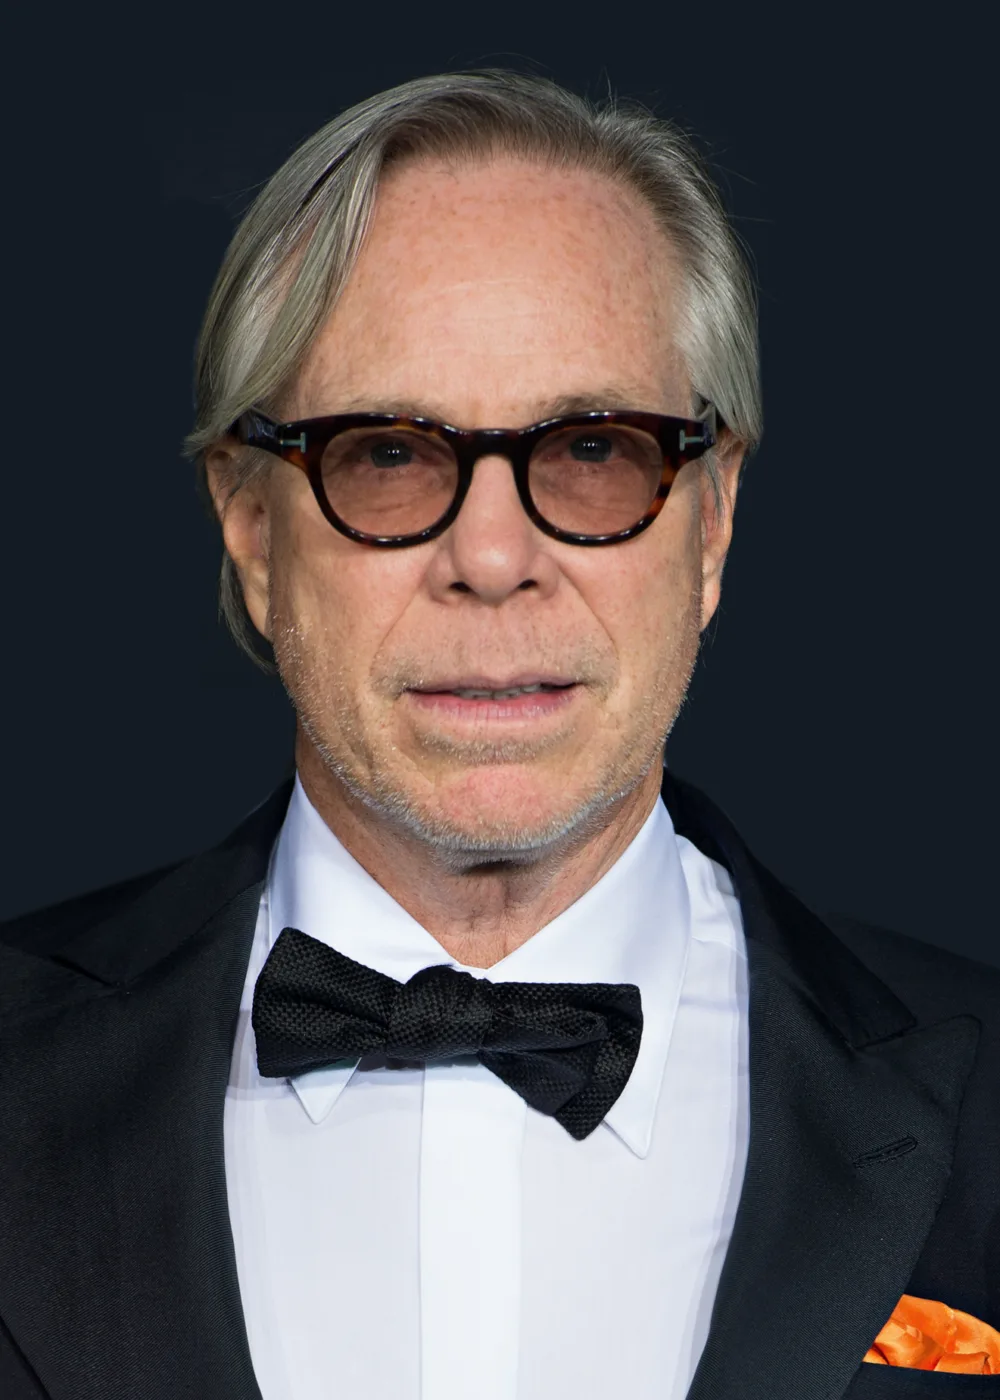 Tommy Hilfiger is an American fashion designer known for creating stylish and high-quality clothing for men, women, and children. He was born on March 24, 1951, in Elmira, New York. Hilfiger started his career in fashion at the age of 18, when he opened his first clothing store. He gained nationwide recognition in the 1990s for his clothing line, which became popular among celebrities and fashion enthusiasts. Throughout his career, Hilfiger has won numerous awards for his contributions to the fashion industry, including the Menswear Designer of the Year award from the Council of Fashion Designers of America. He is also known for his philanthropy work, supporting organizations such as the Breast Health Institute, the Elizabeth Glaser Pediatric AIDS Foundation, and the Anti-Defamation League. Today, Tommy Hilfiger is a global fashion brand, with stores and products sold in countries around the world.